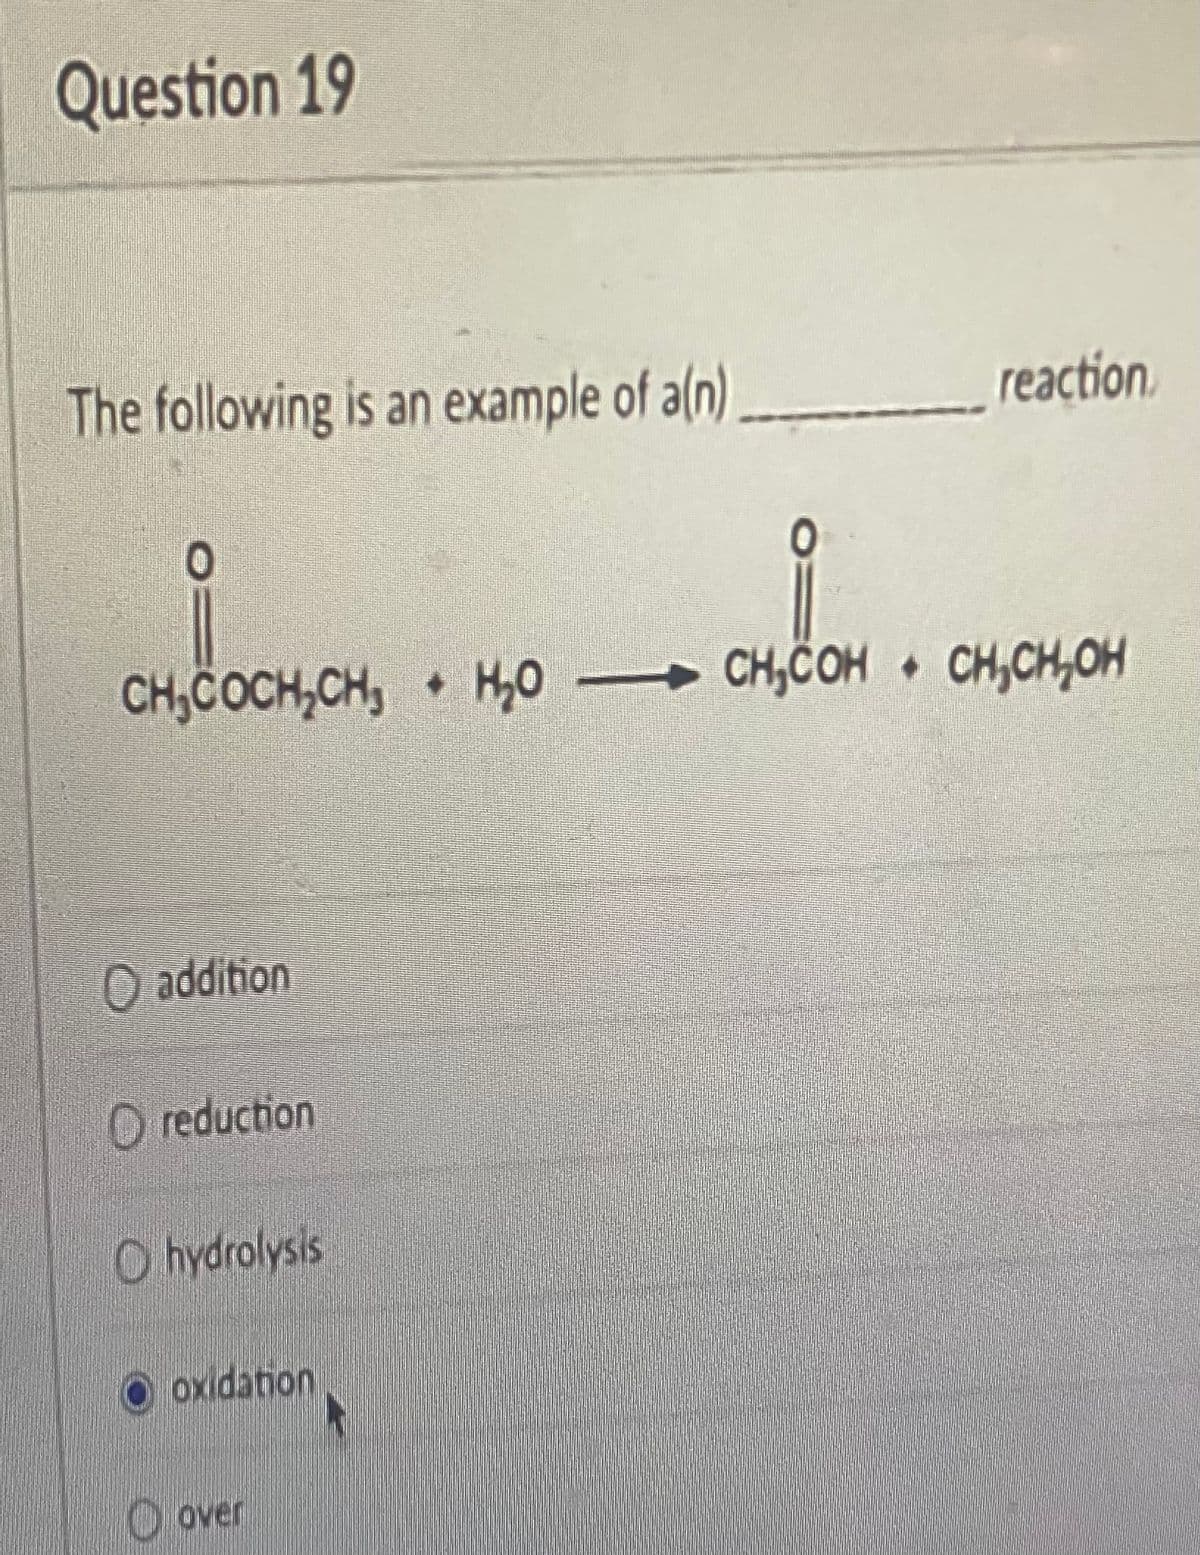 Question 19
The following is an example of a(n) ____________ reaction.
+4.004.04
i . снон
CH₂COCH₂CH₂ + H₂O CH₂COH CH₂CH₂OH
O addition
O reduction
Ohydrolysis
oxidation
Ⓒover